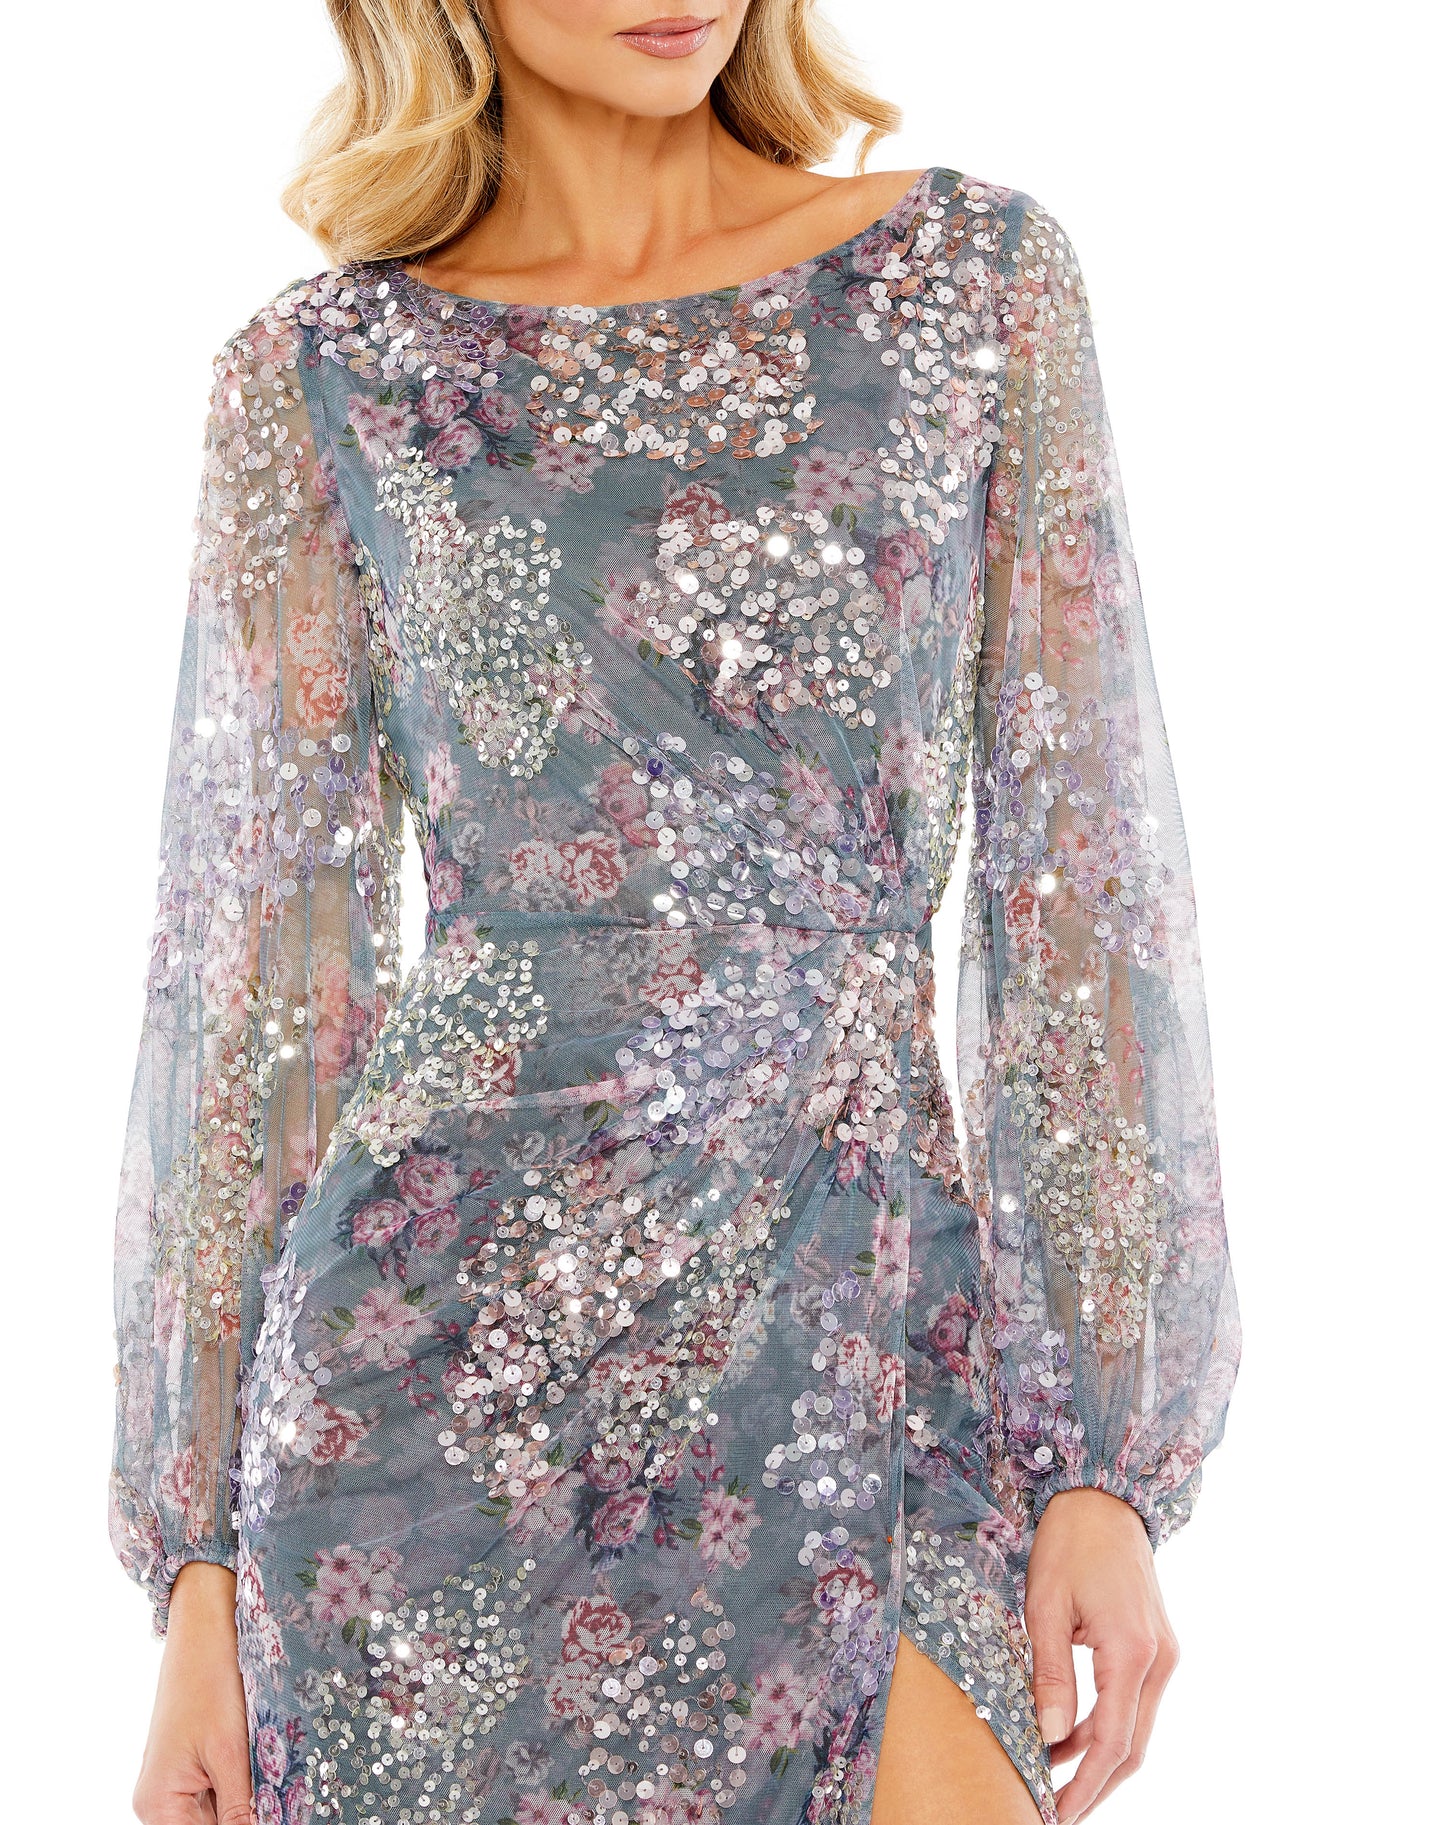 Mac Duggal Floral embellished mesh fabric (100% polyester) Fully lined through body; sheer unlined sleeves Boat neckline Long blouson sleeves Thigh-high front slit Concealed back zipper Approx. 62.5" from top of shoulder to bottom hem Available in Grey Mu